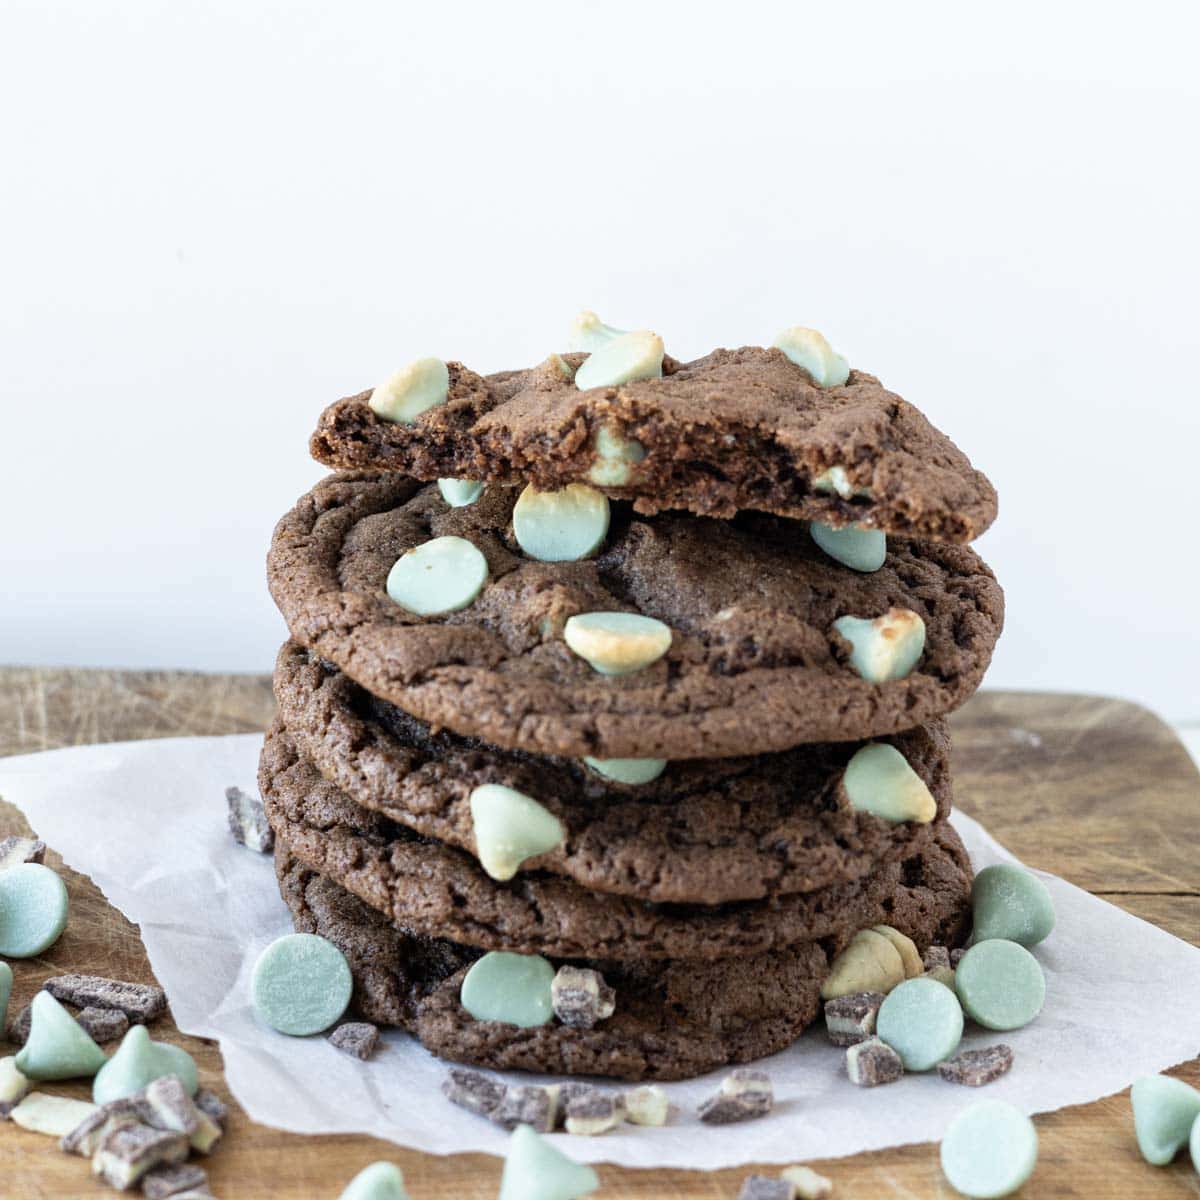 A stack of mint chip chocolate cookies with a bite taken out of the top cookie.